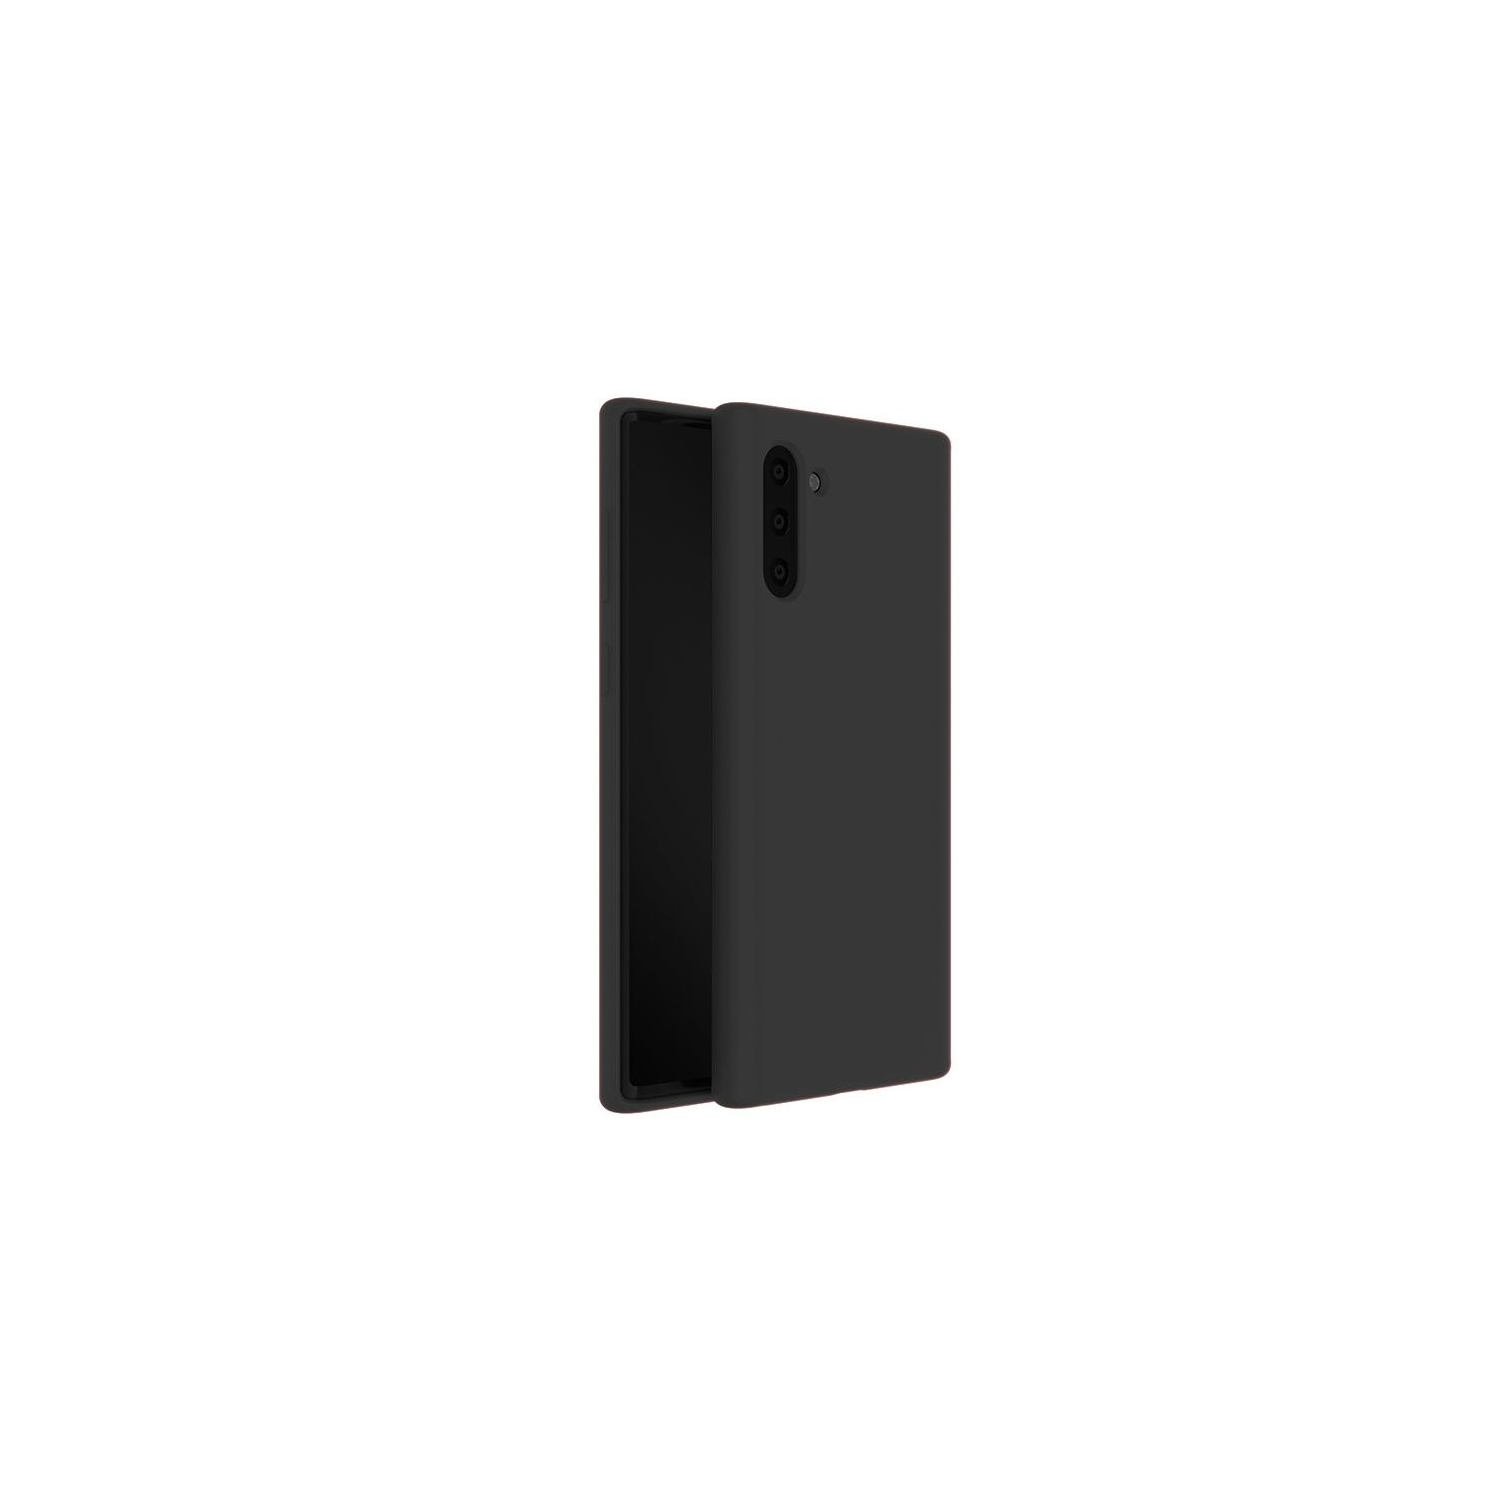 PANDACO Soft Shell Matte Black Case for Samsung Galaxy Note 10